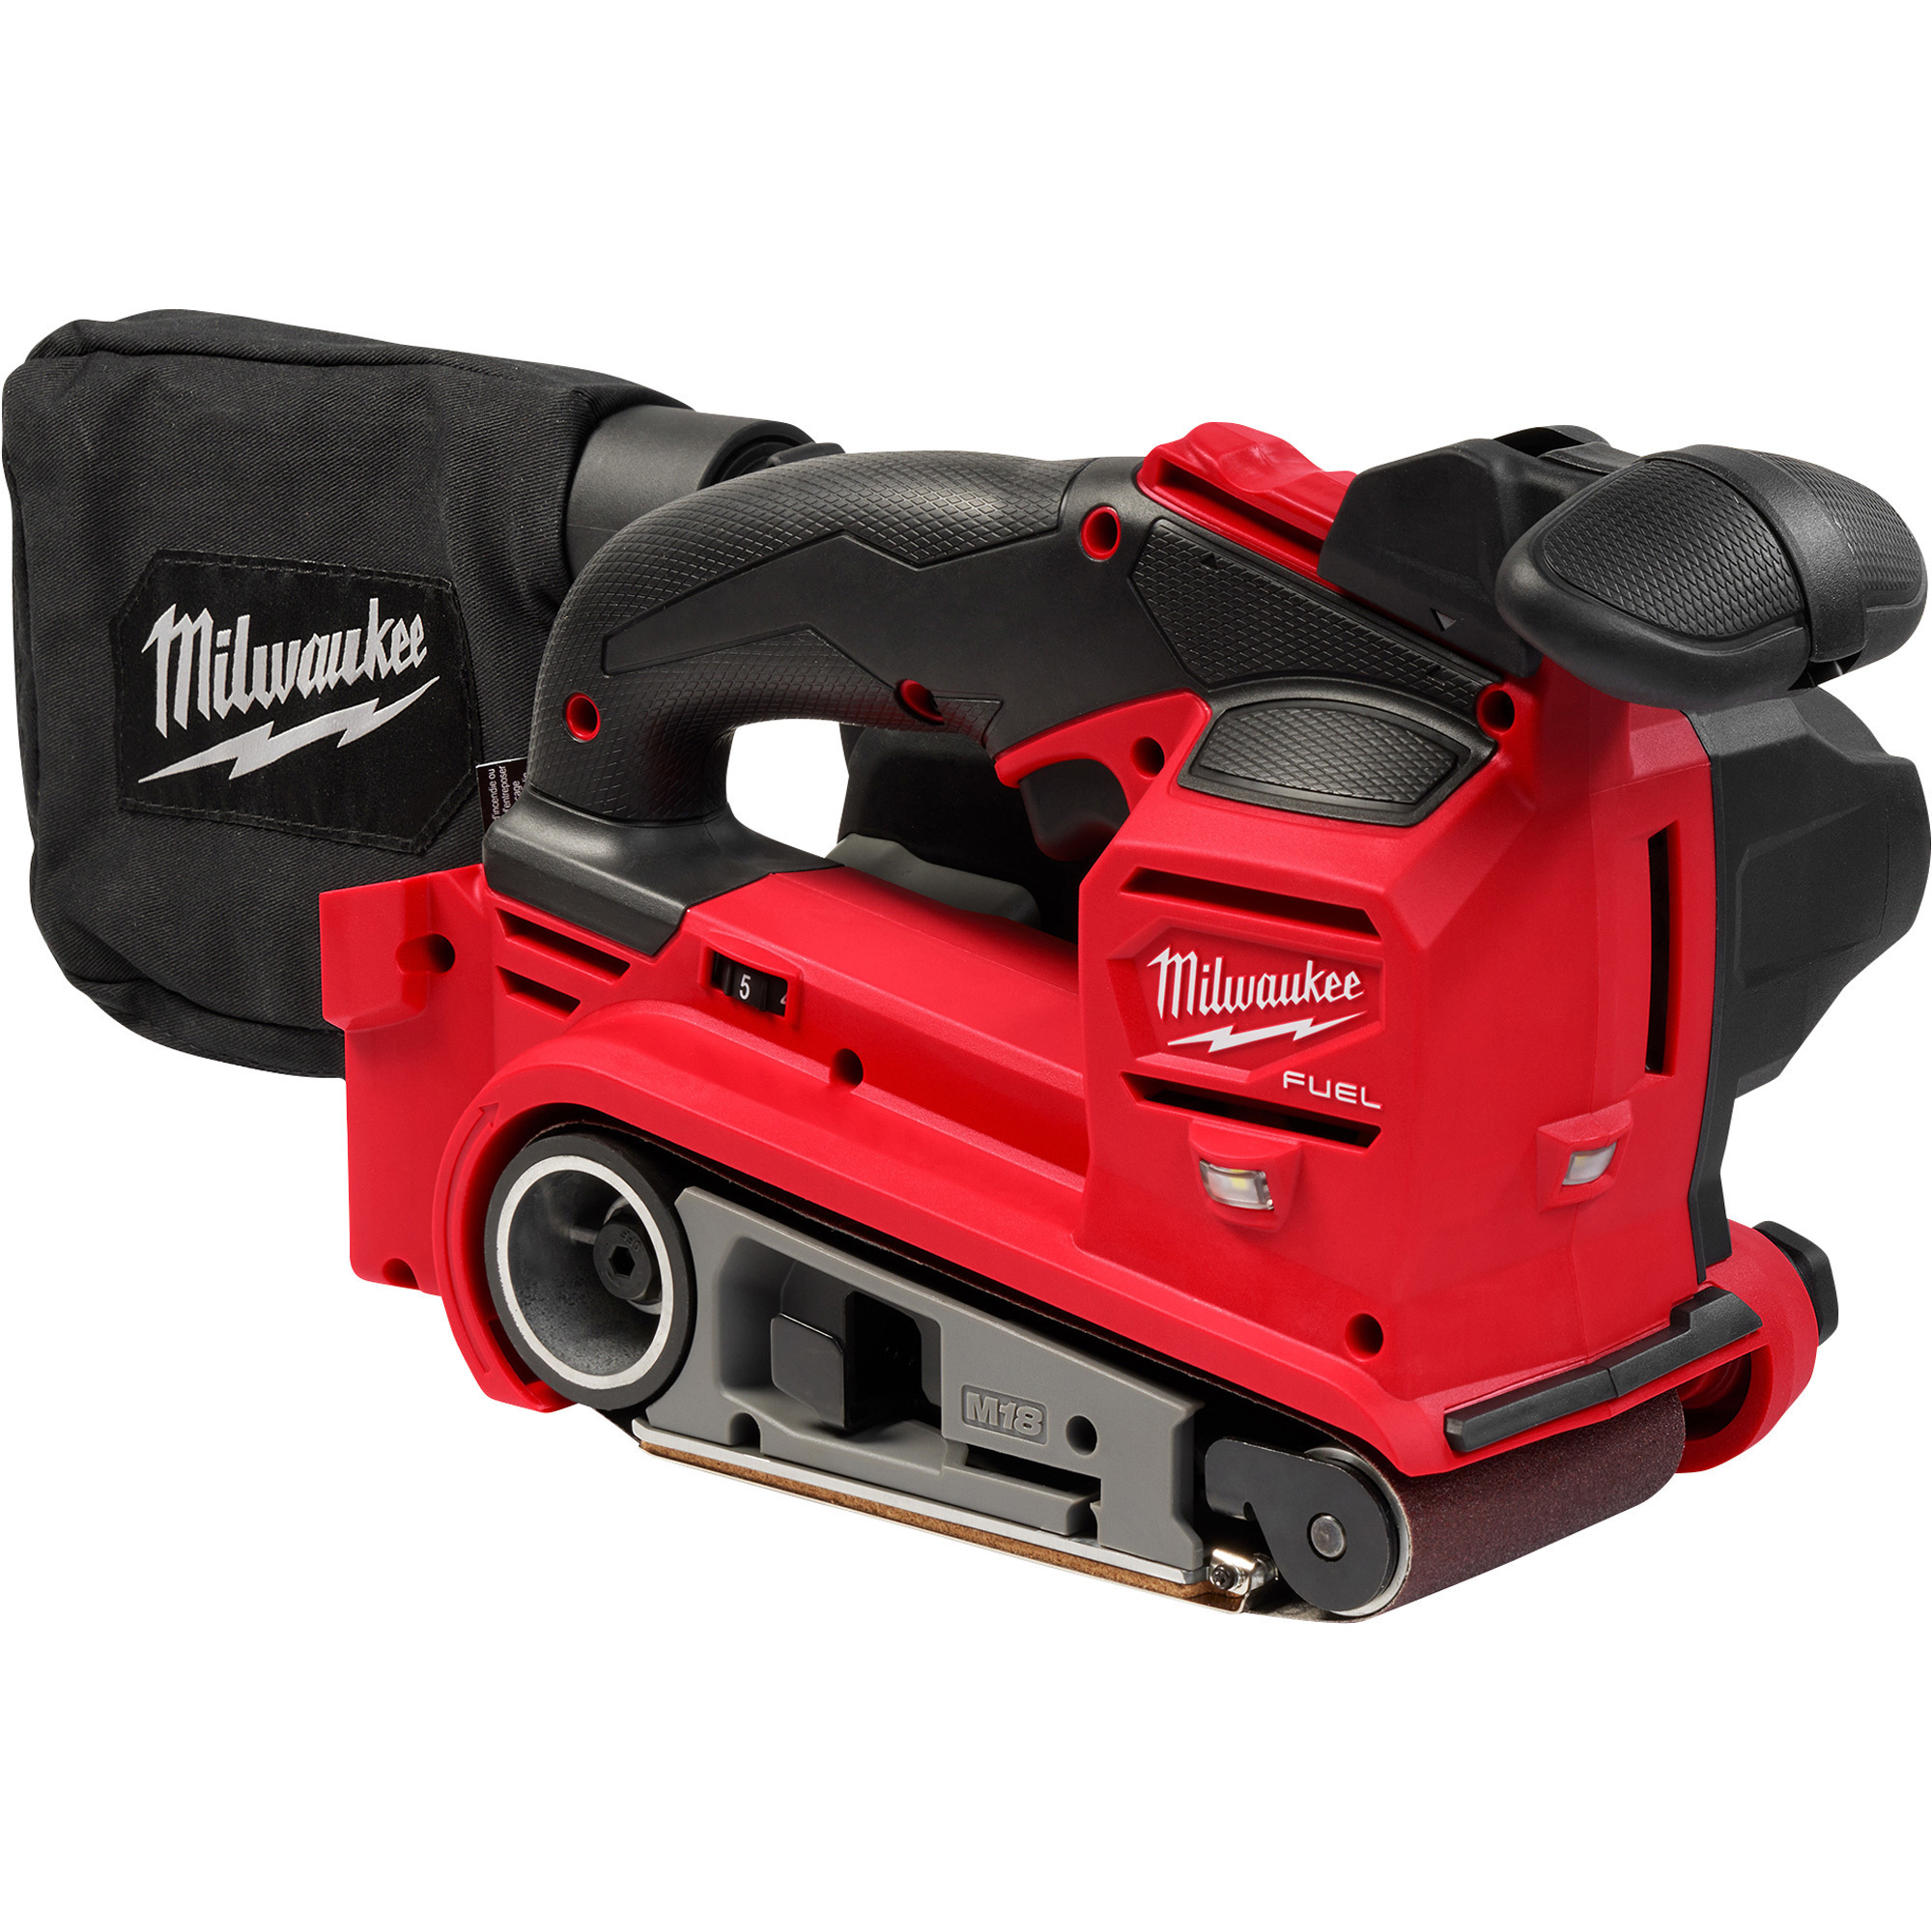 Milwaukee M18 FUEL CordlessBelt Sander, Tool Only, 3Inch x 18Inch, Model 2832-20